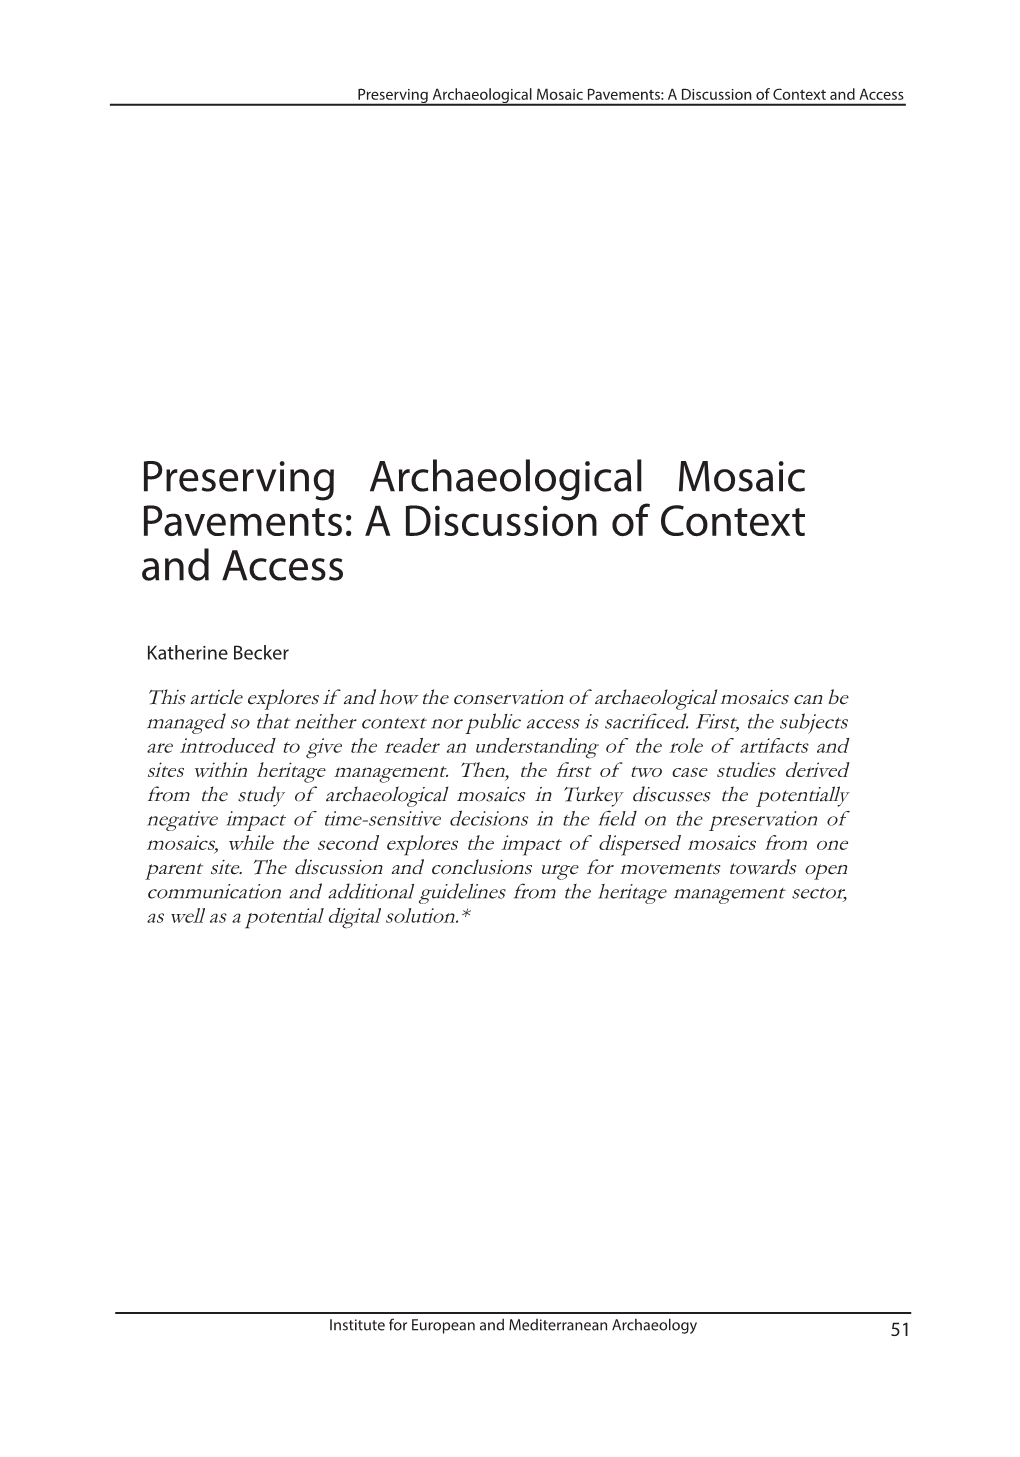 Preserving Archaeological Mosaic Pavements: a Discussion of Context and Access